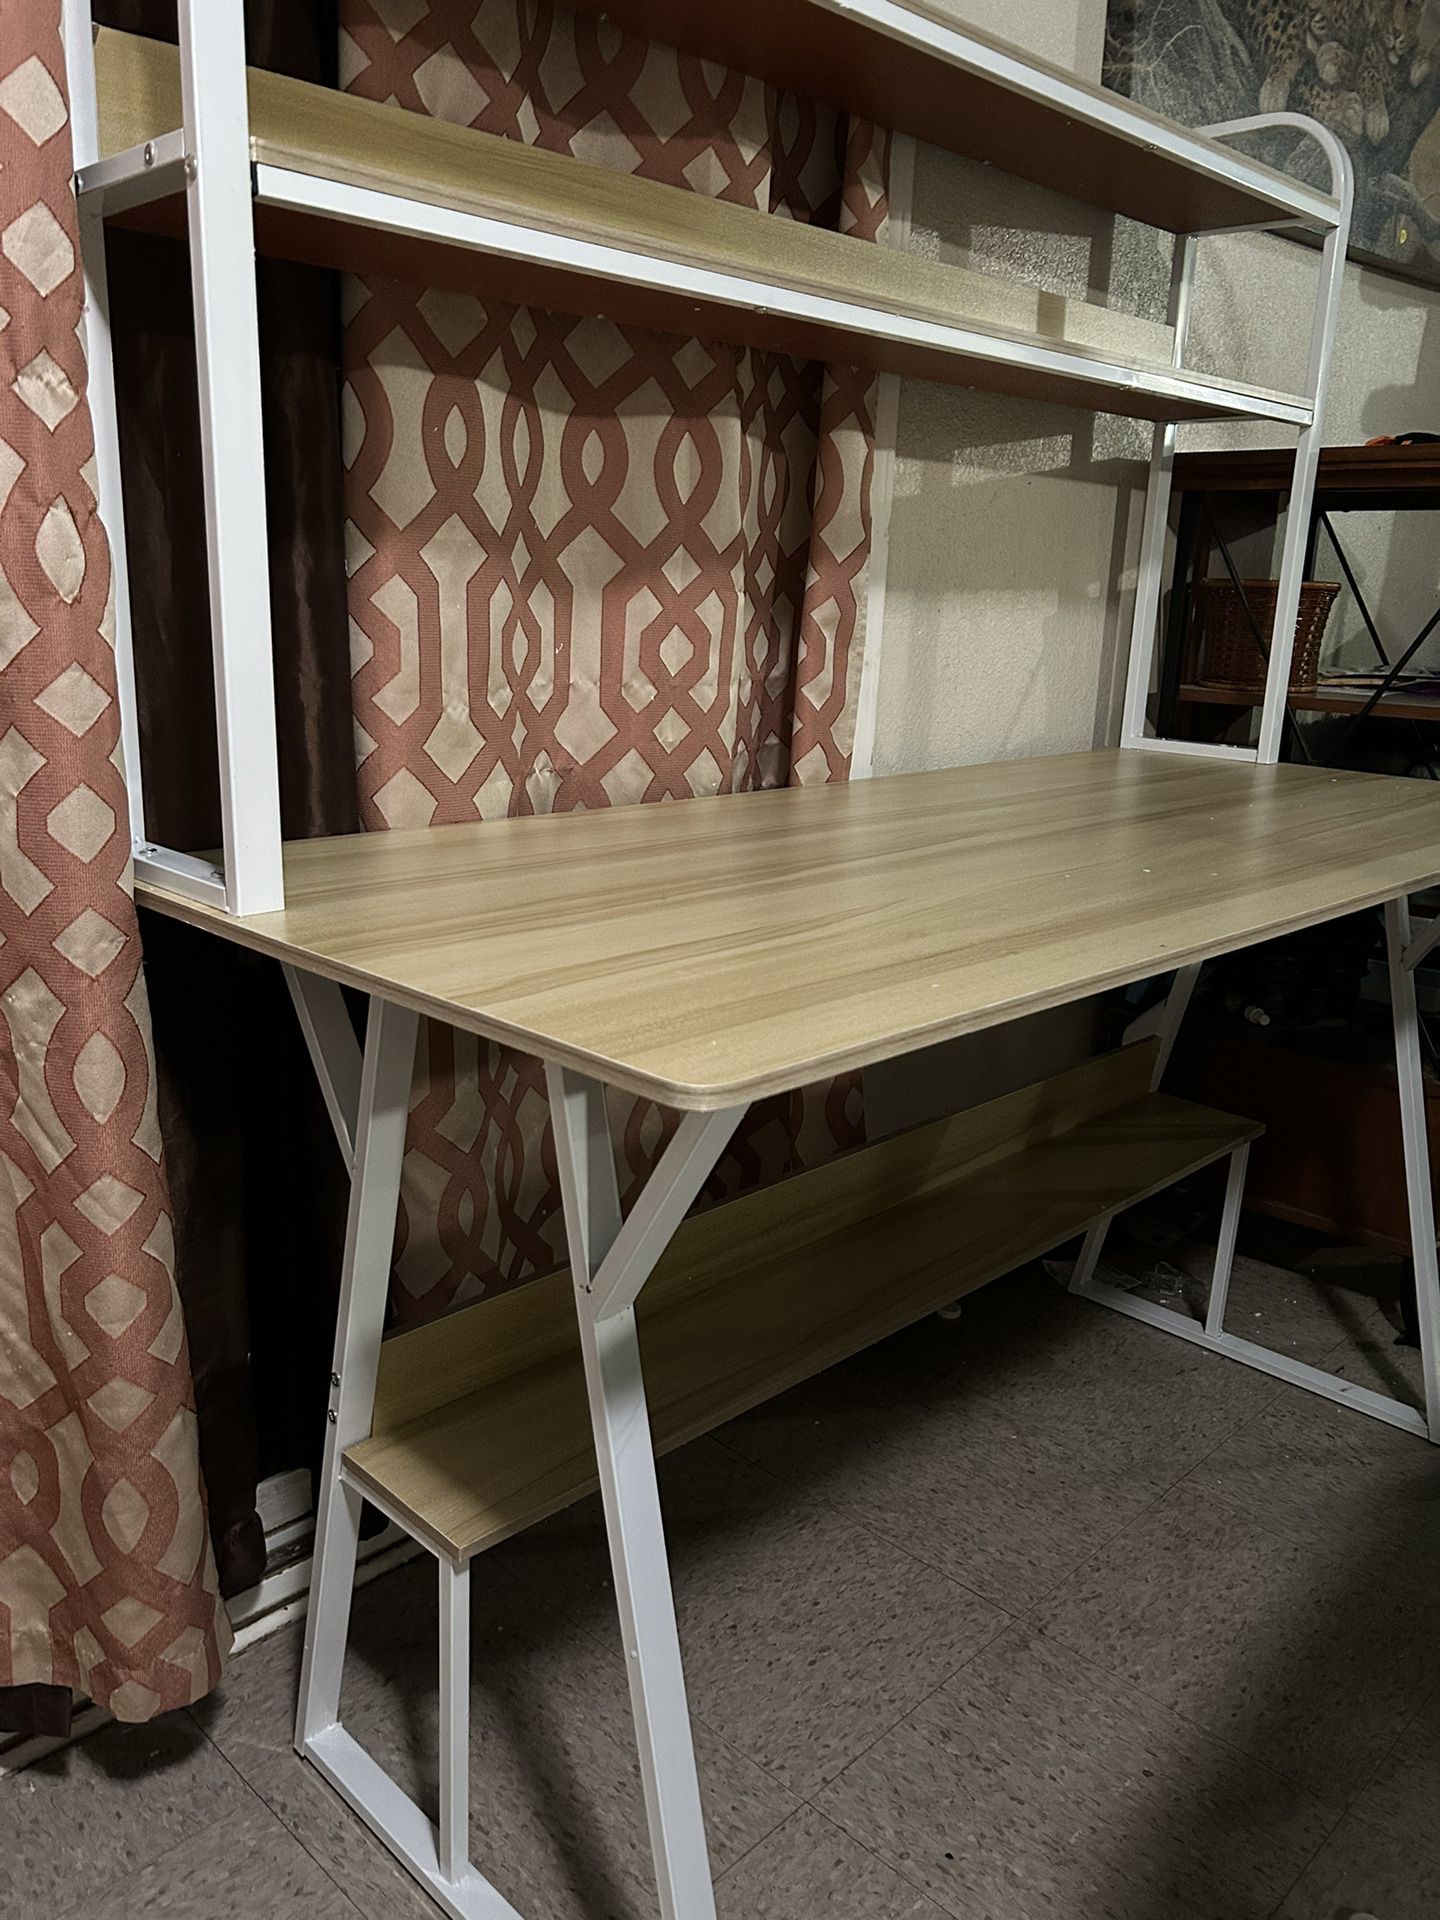 Sewing Crafting Wide Table with Shelves